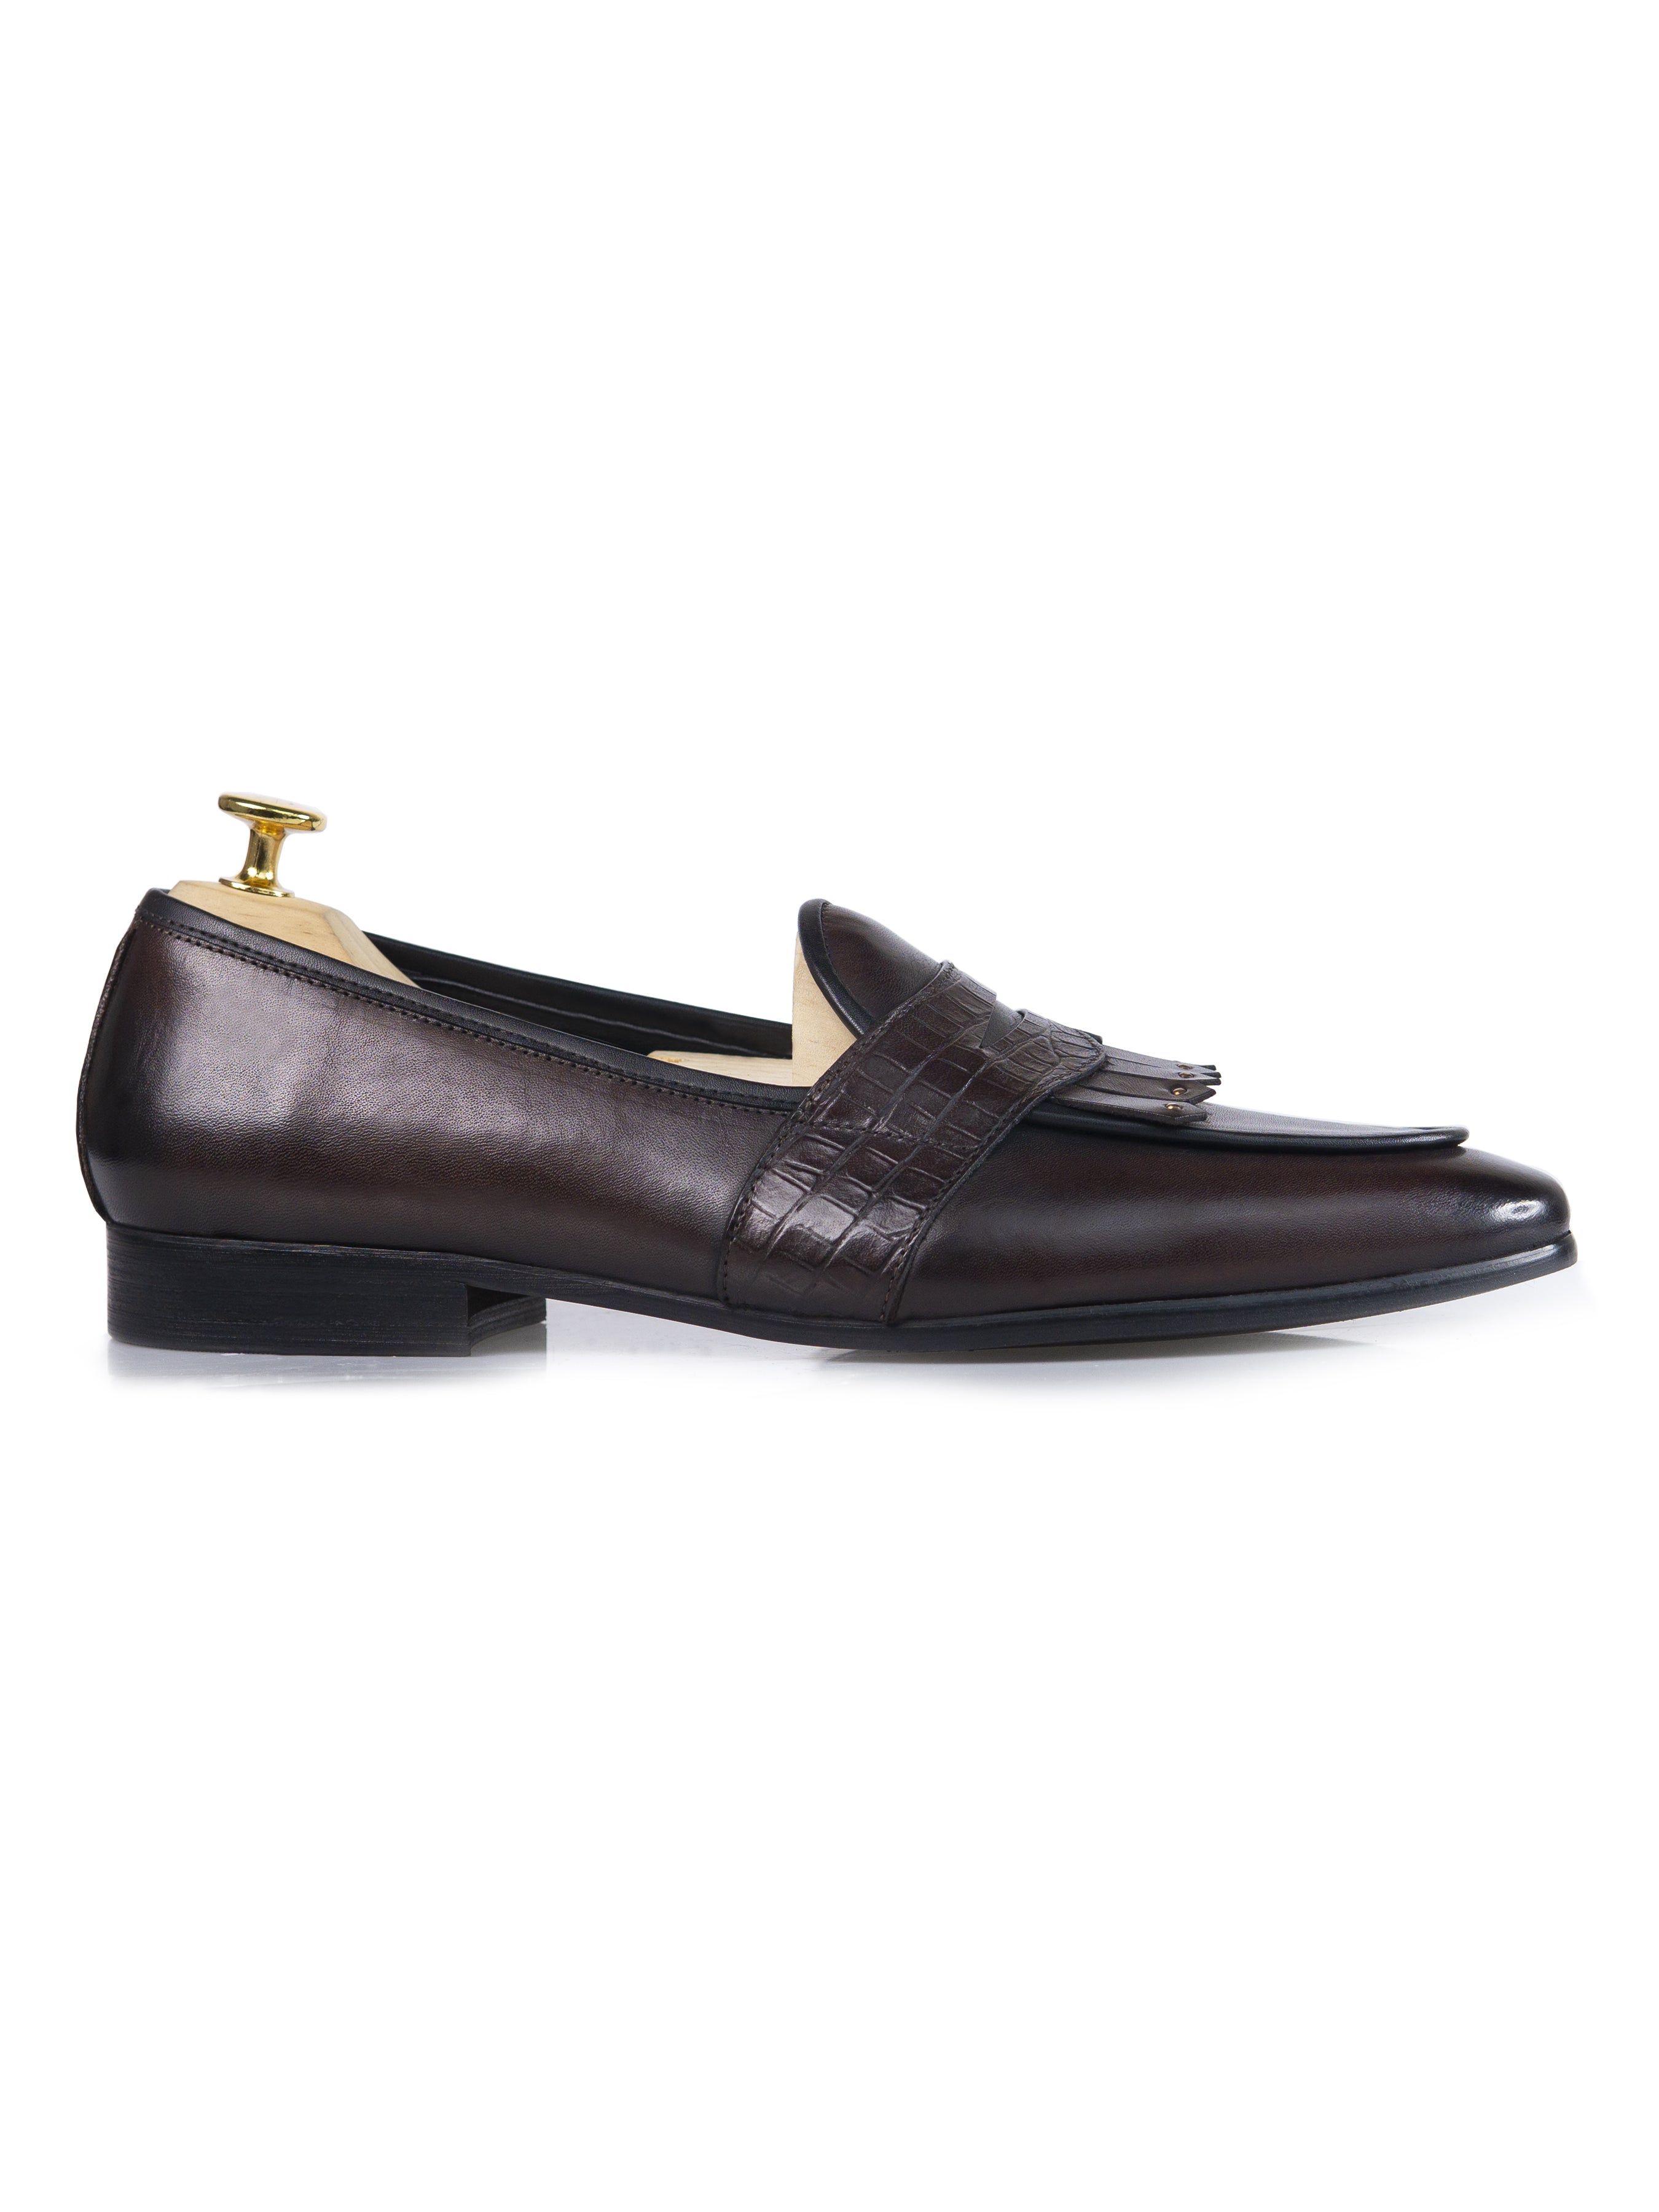 Belgian Loafer - Dark Brown Phyton Penny Strap with Studded Fringe (Hand Painted Patina) - Zeve Shoes